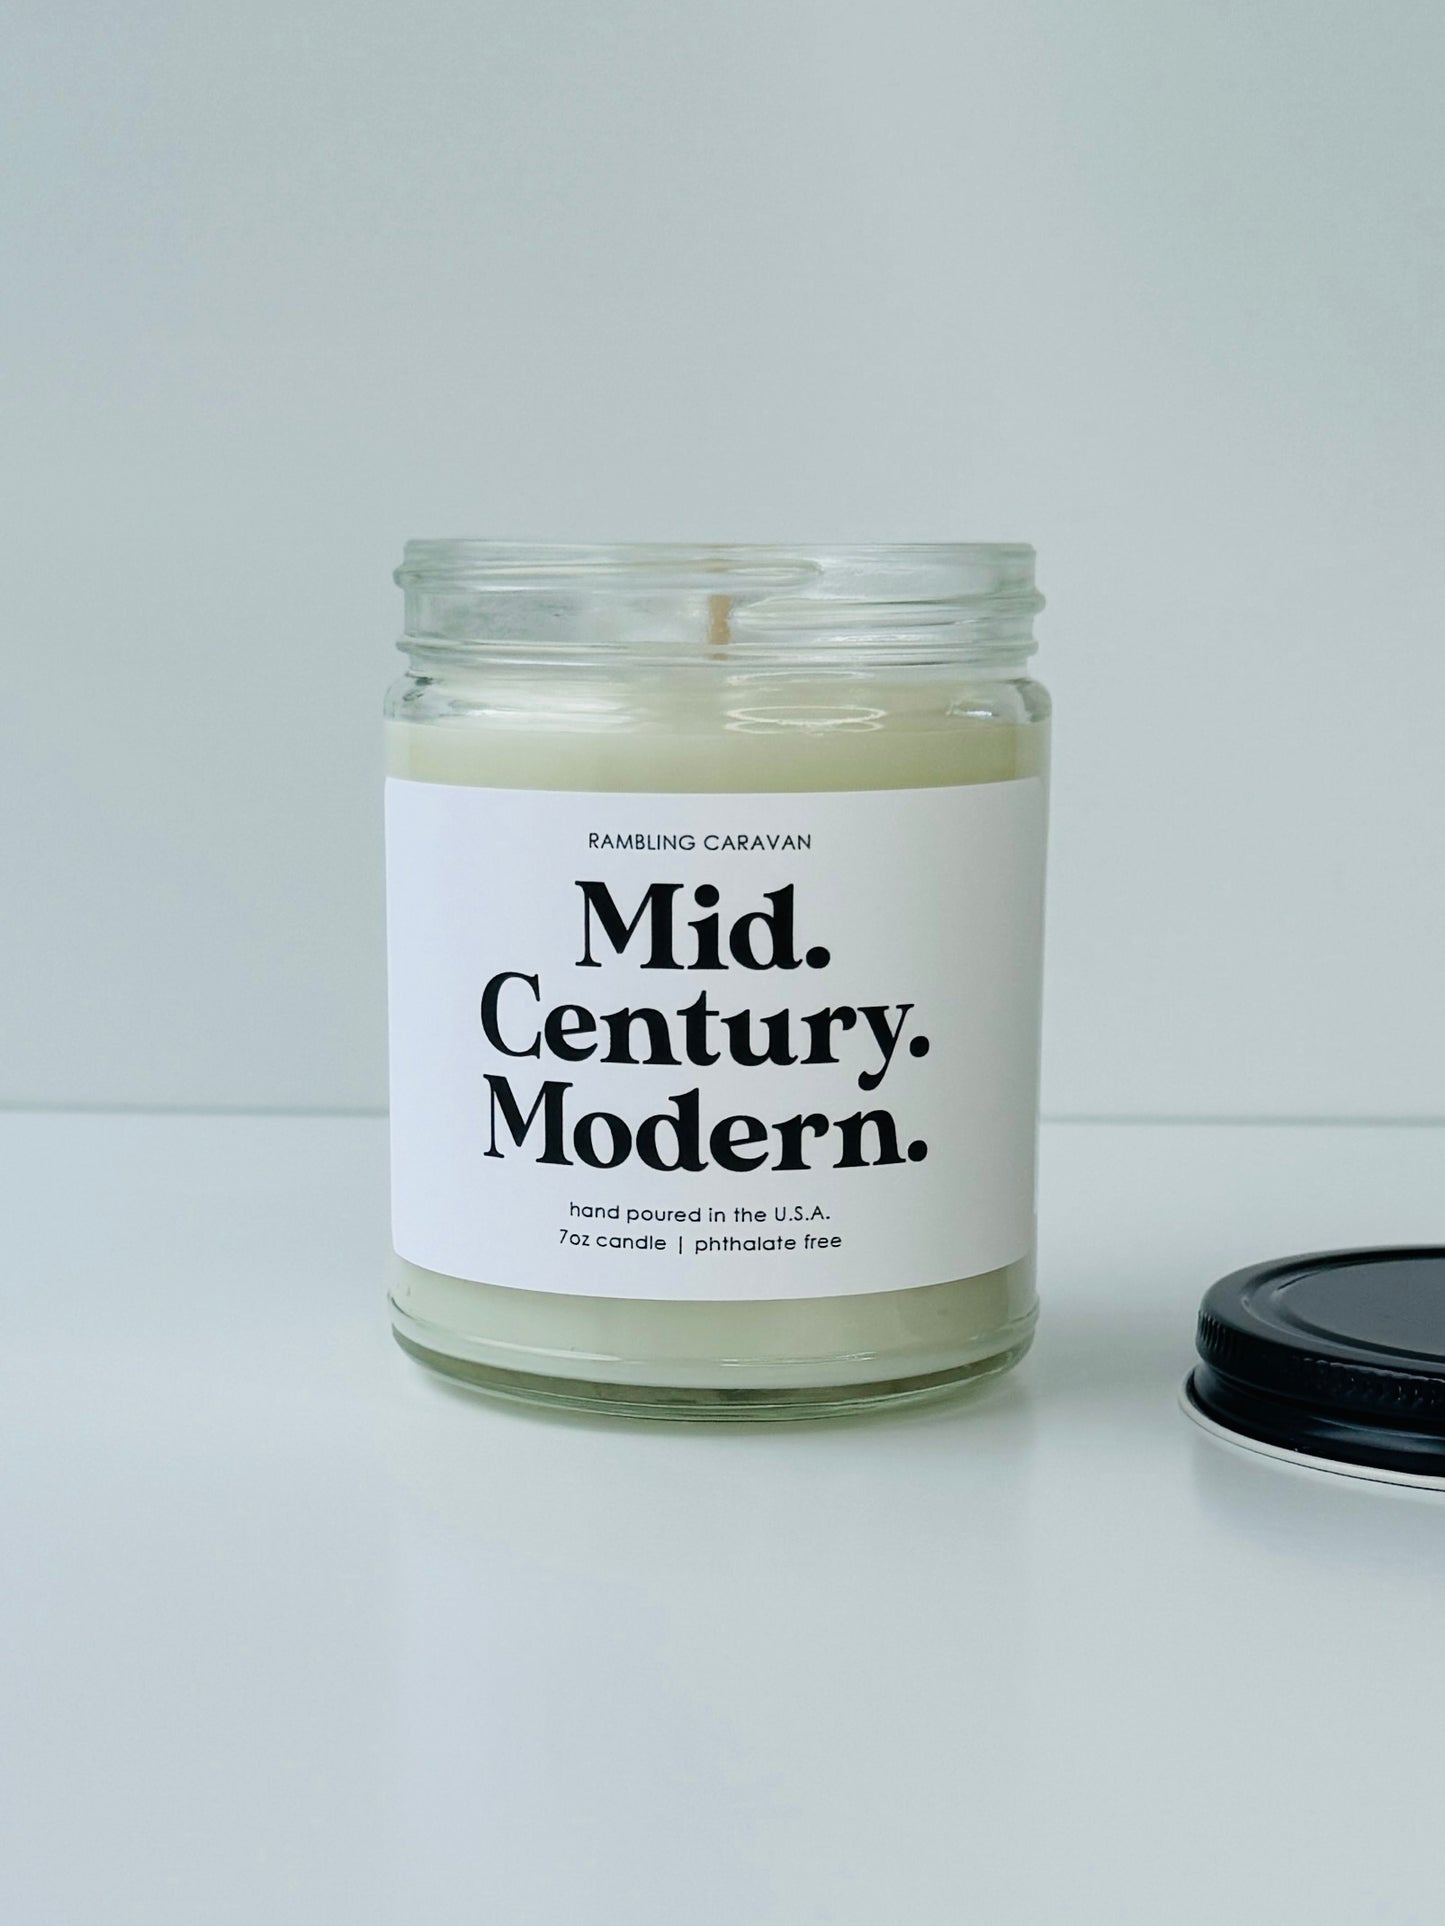 Mid. Century. Modern. Candle